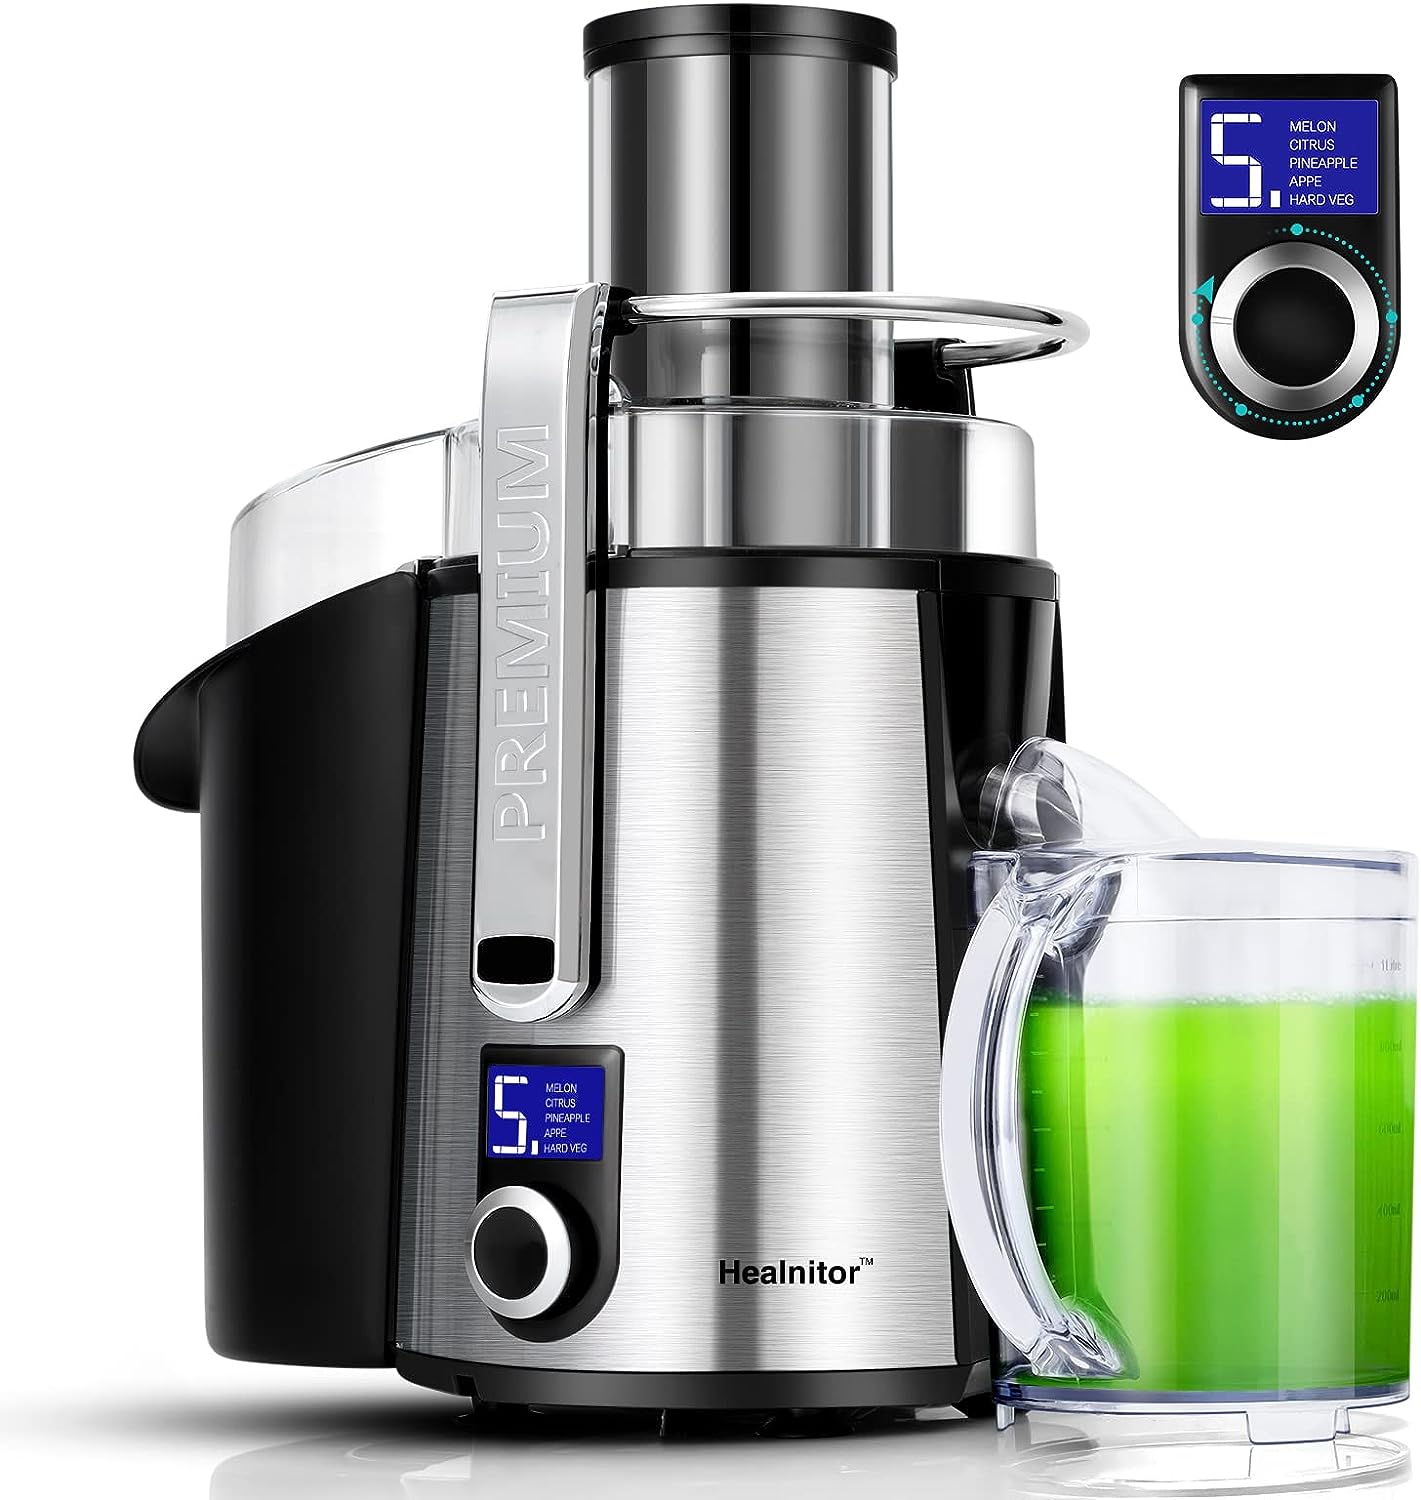 1000w-5-speed-lcd-screen-centrifugal-juicer-machines-vegetable-and-fruit-healnitor-juice-extractor-with-big-adjustable-3-wide-chute-easy-clean-bpa-free-high-juice-yield-silver-2